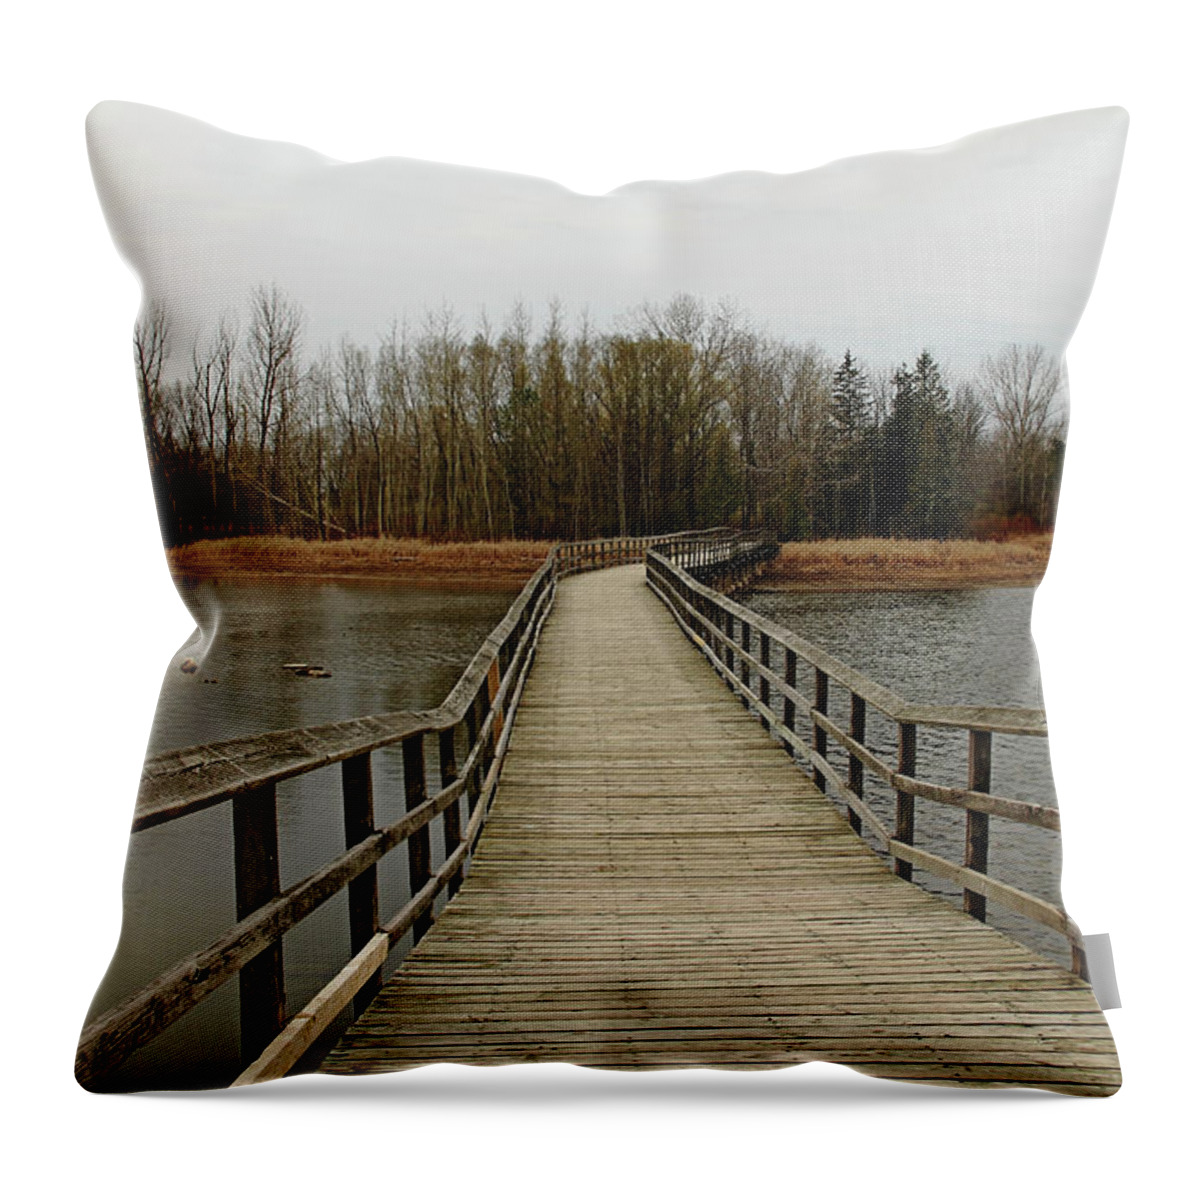 Cambridge Throw Pillow featuring the photograph Boardwalk by Debbie Oppermann